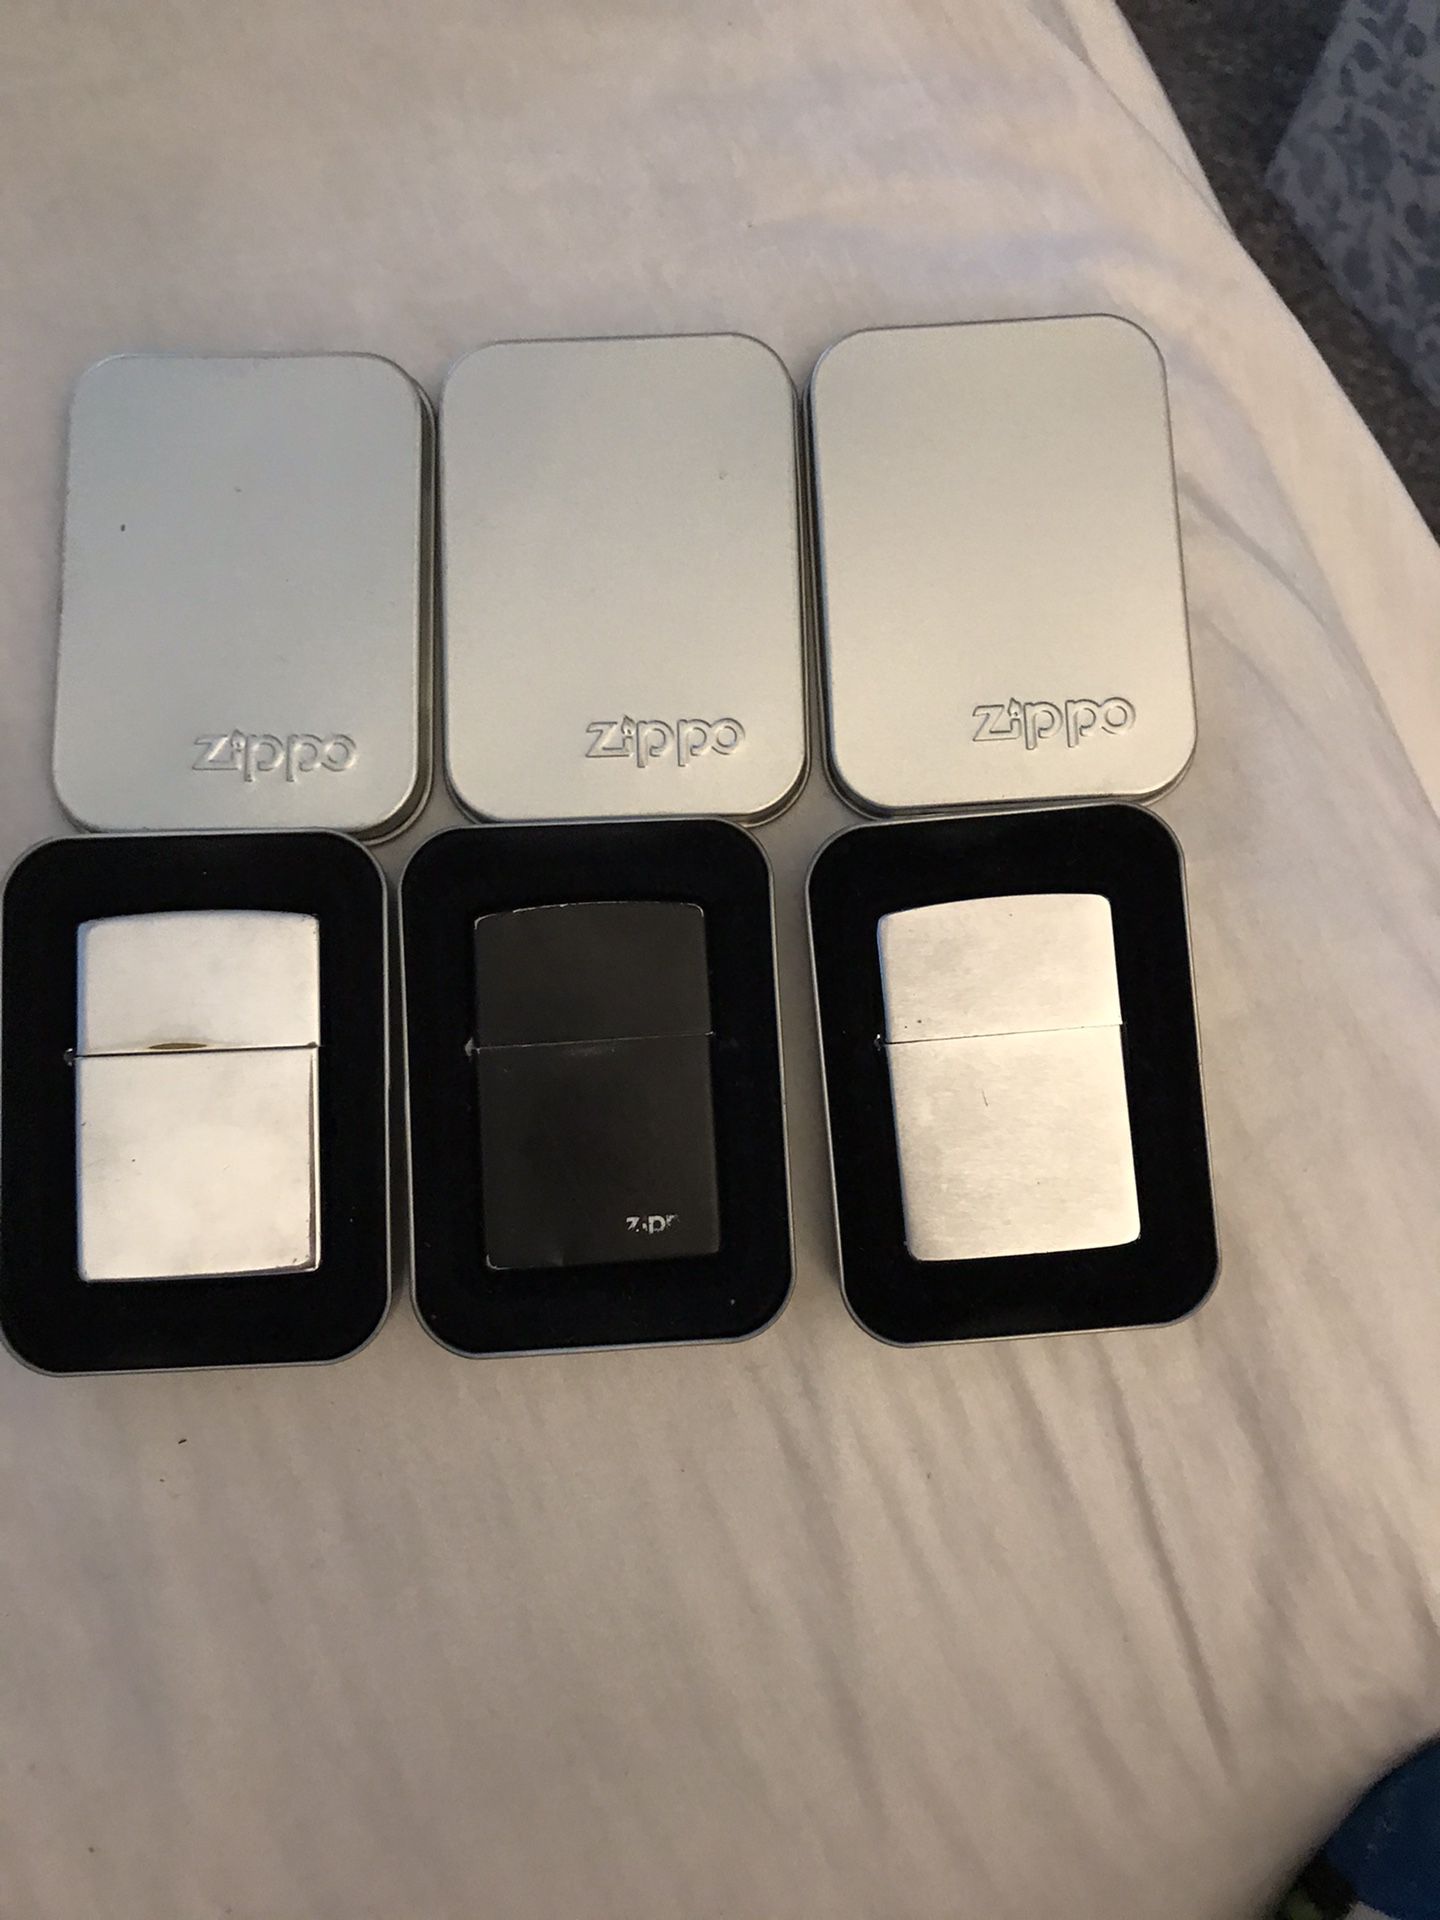 3 zippo lighters - used - porch pick up Chesterfield only